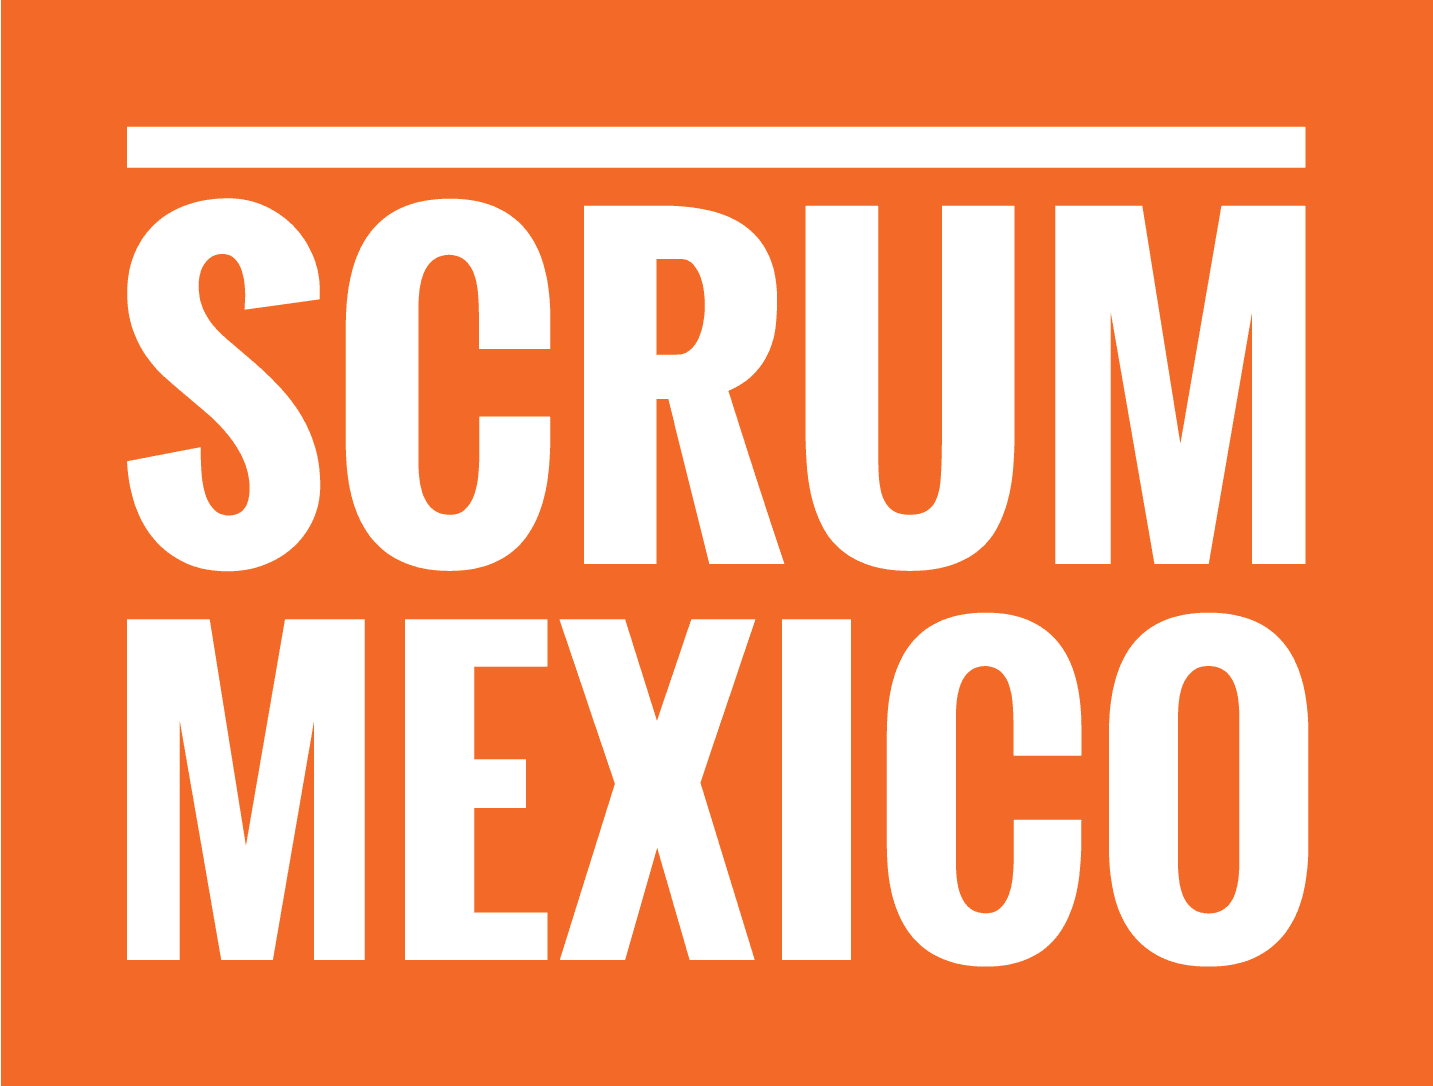 scrum-mexico.png